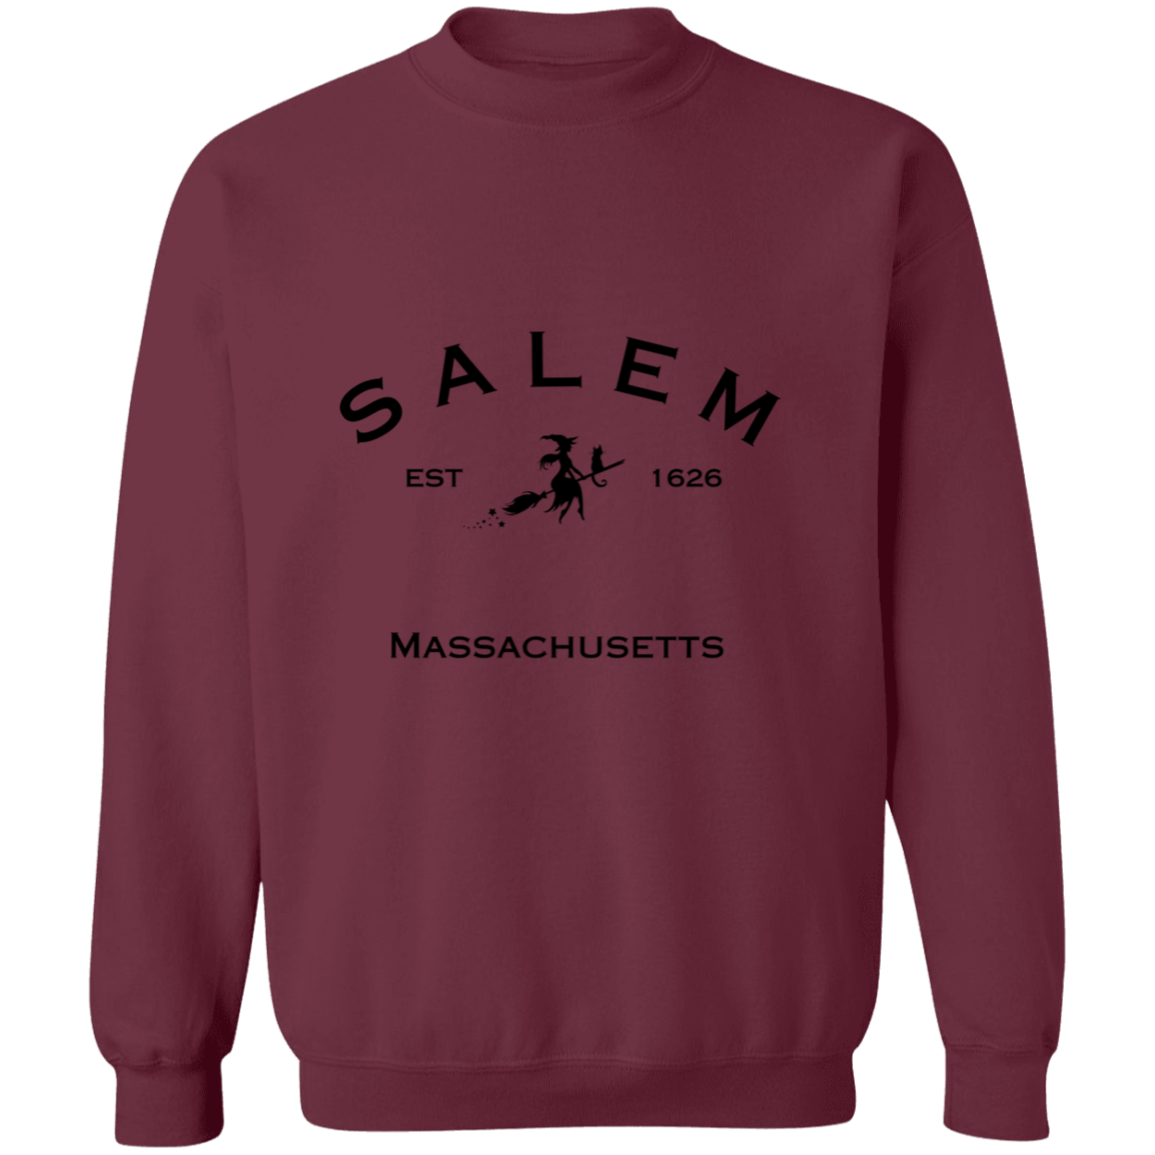 Get trendy with SALEM Crewneck Pullover Sweatshirt - Sweatshirts available at Good Gift Company. Grab yours for $31.95 today!